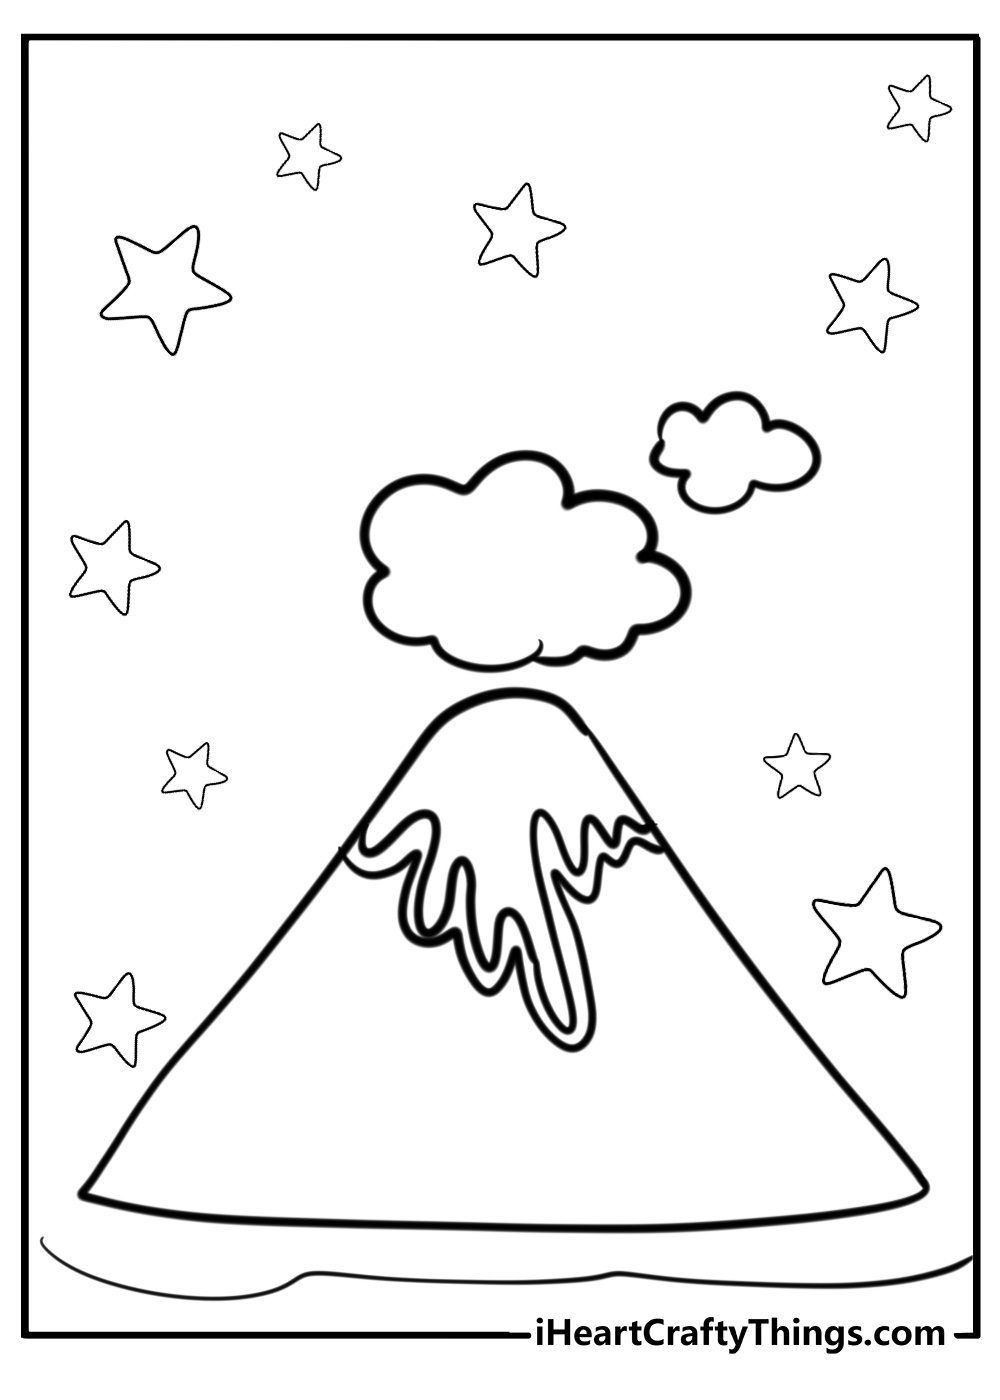 Volcano coloring sheet for kids